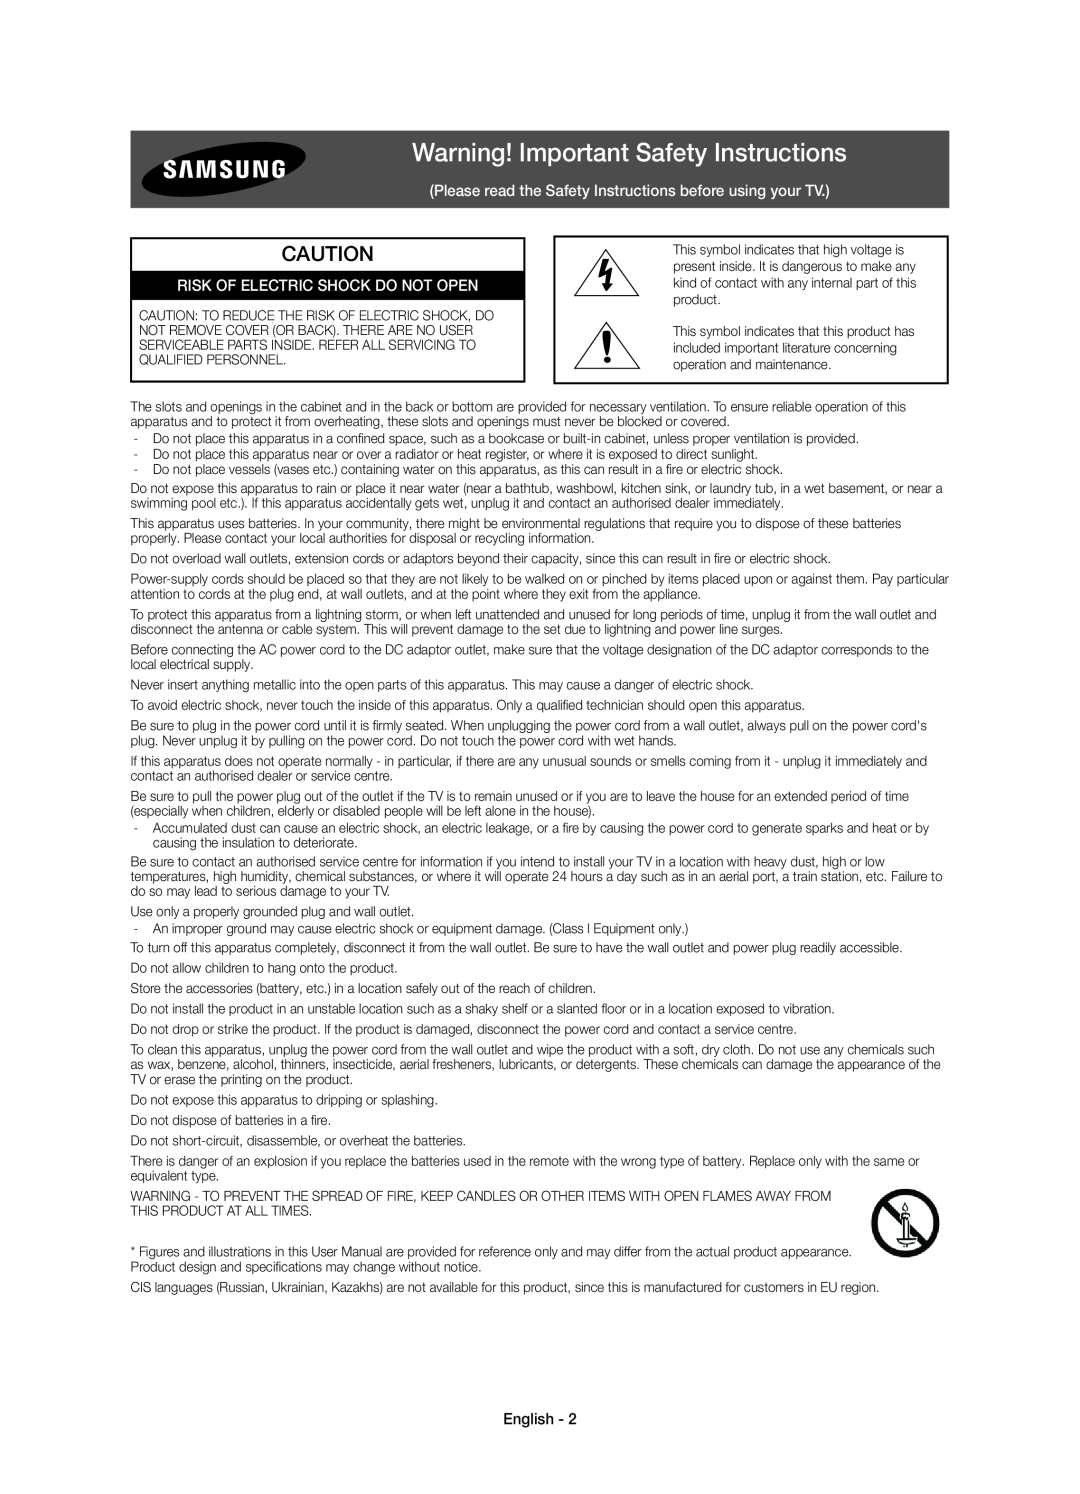 Samsung UE75JU7000TXZF Warning! Important Safety Instructions, Please read the Safety Instructions before using your TV 